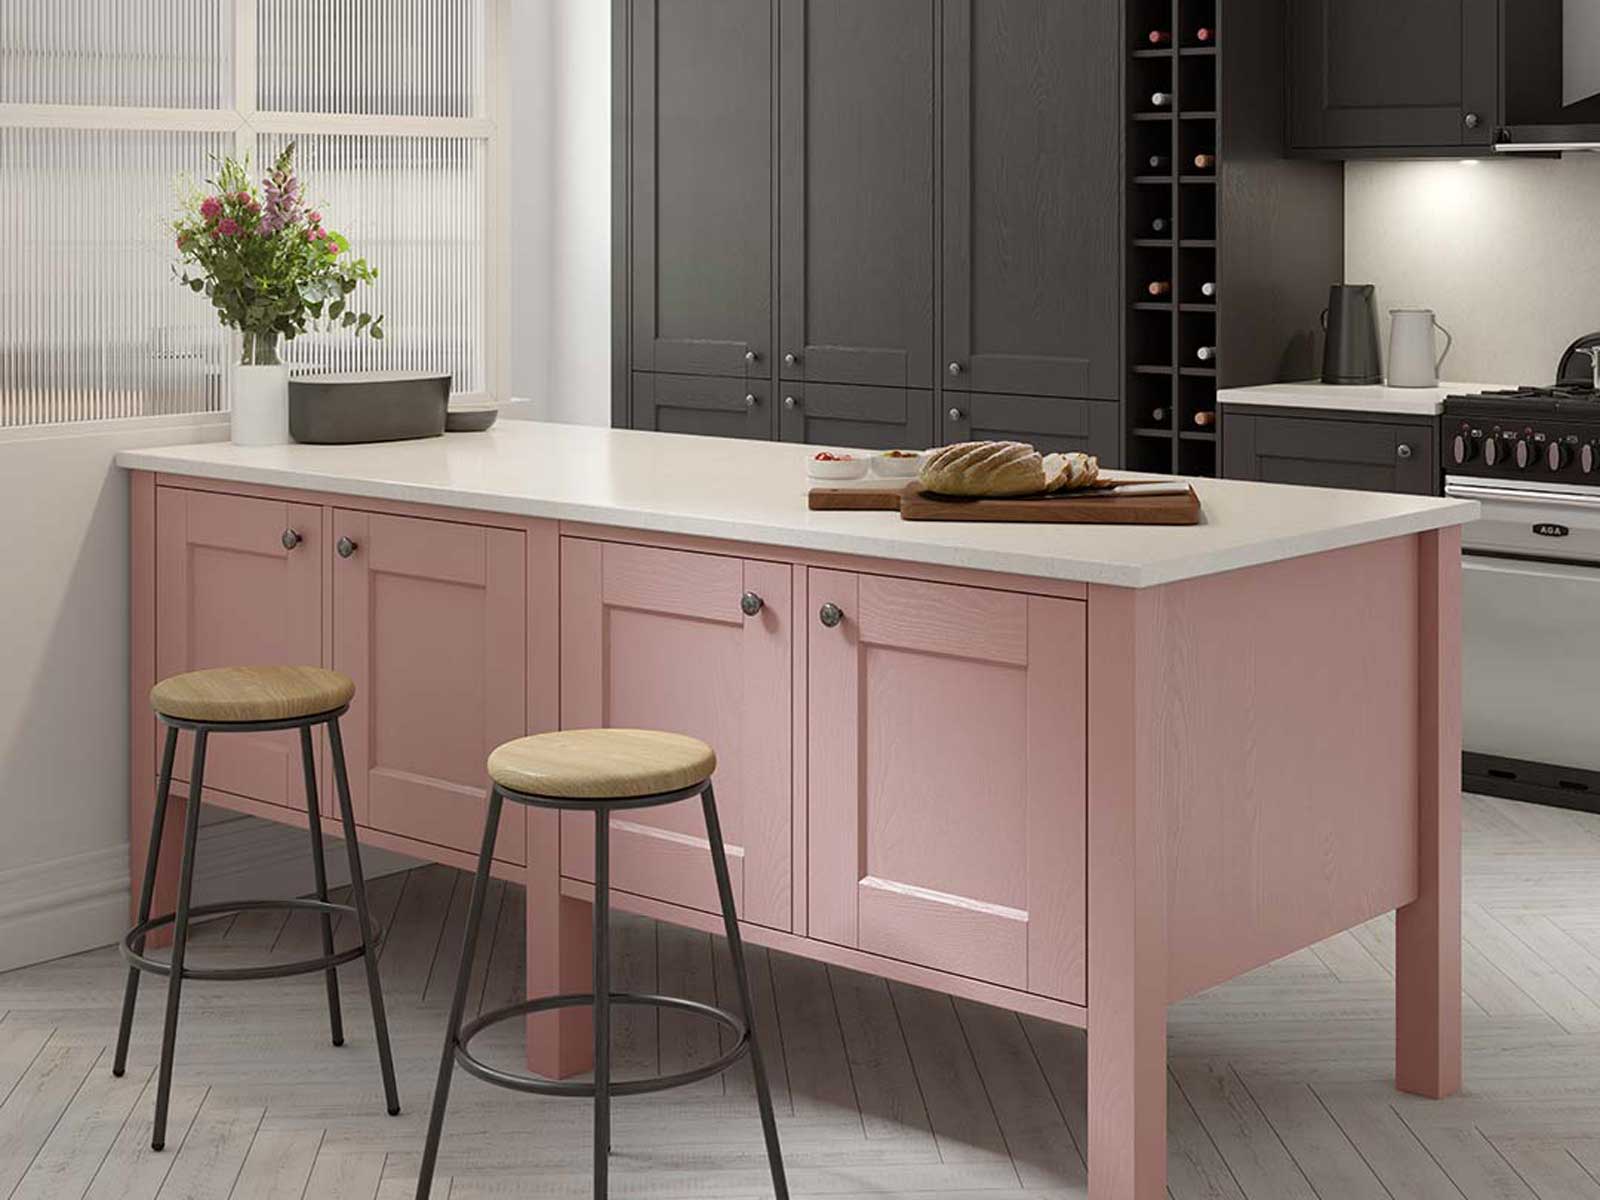 A pale pink Solva compact kitchen island fronting tall cabinets and a wine rack